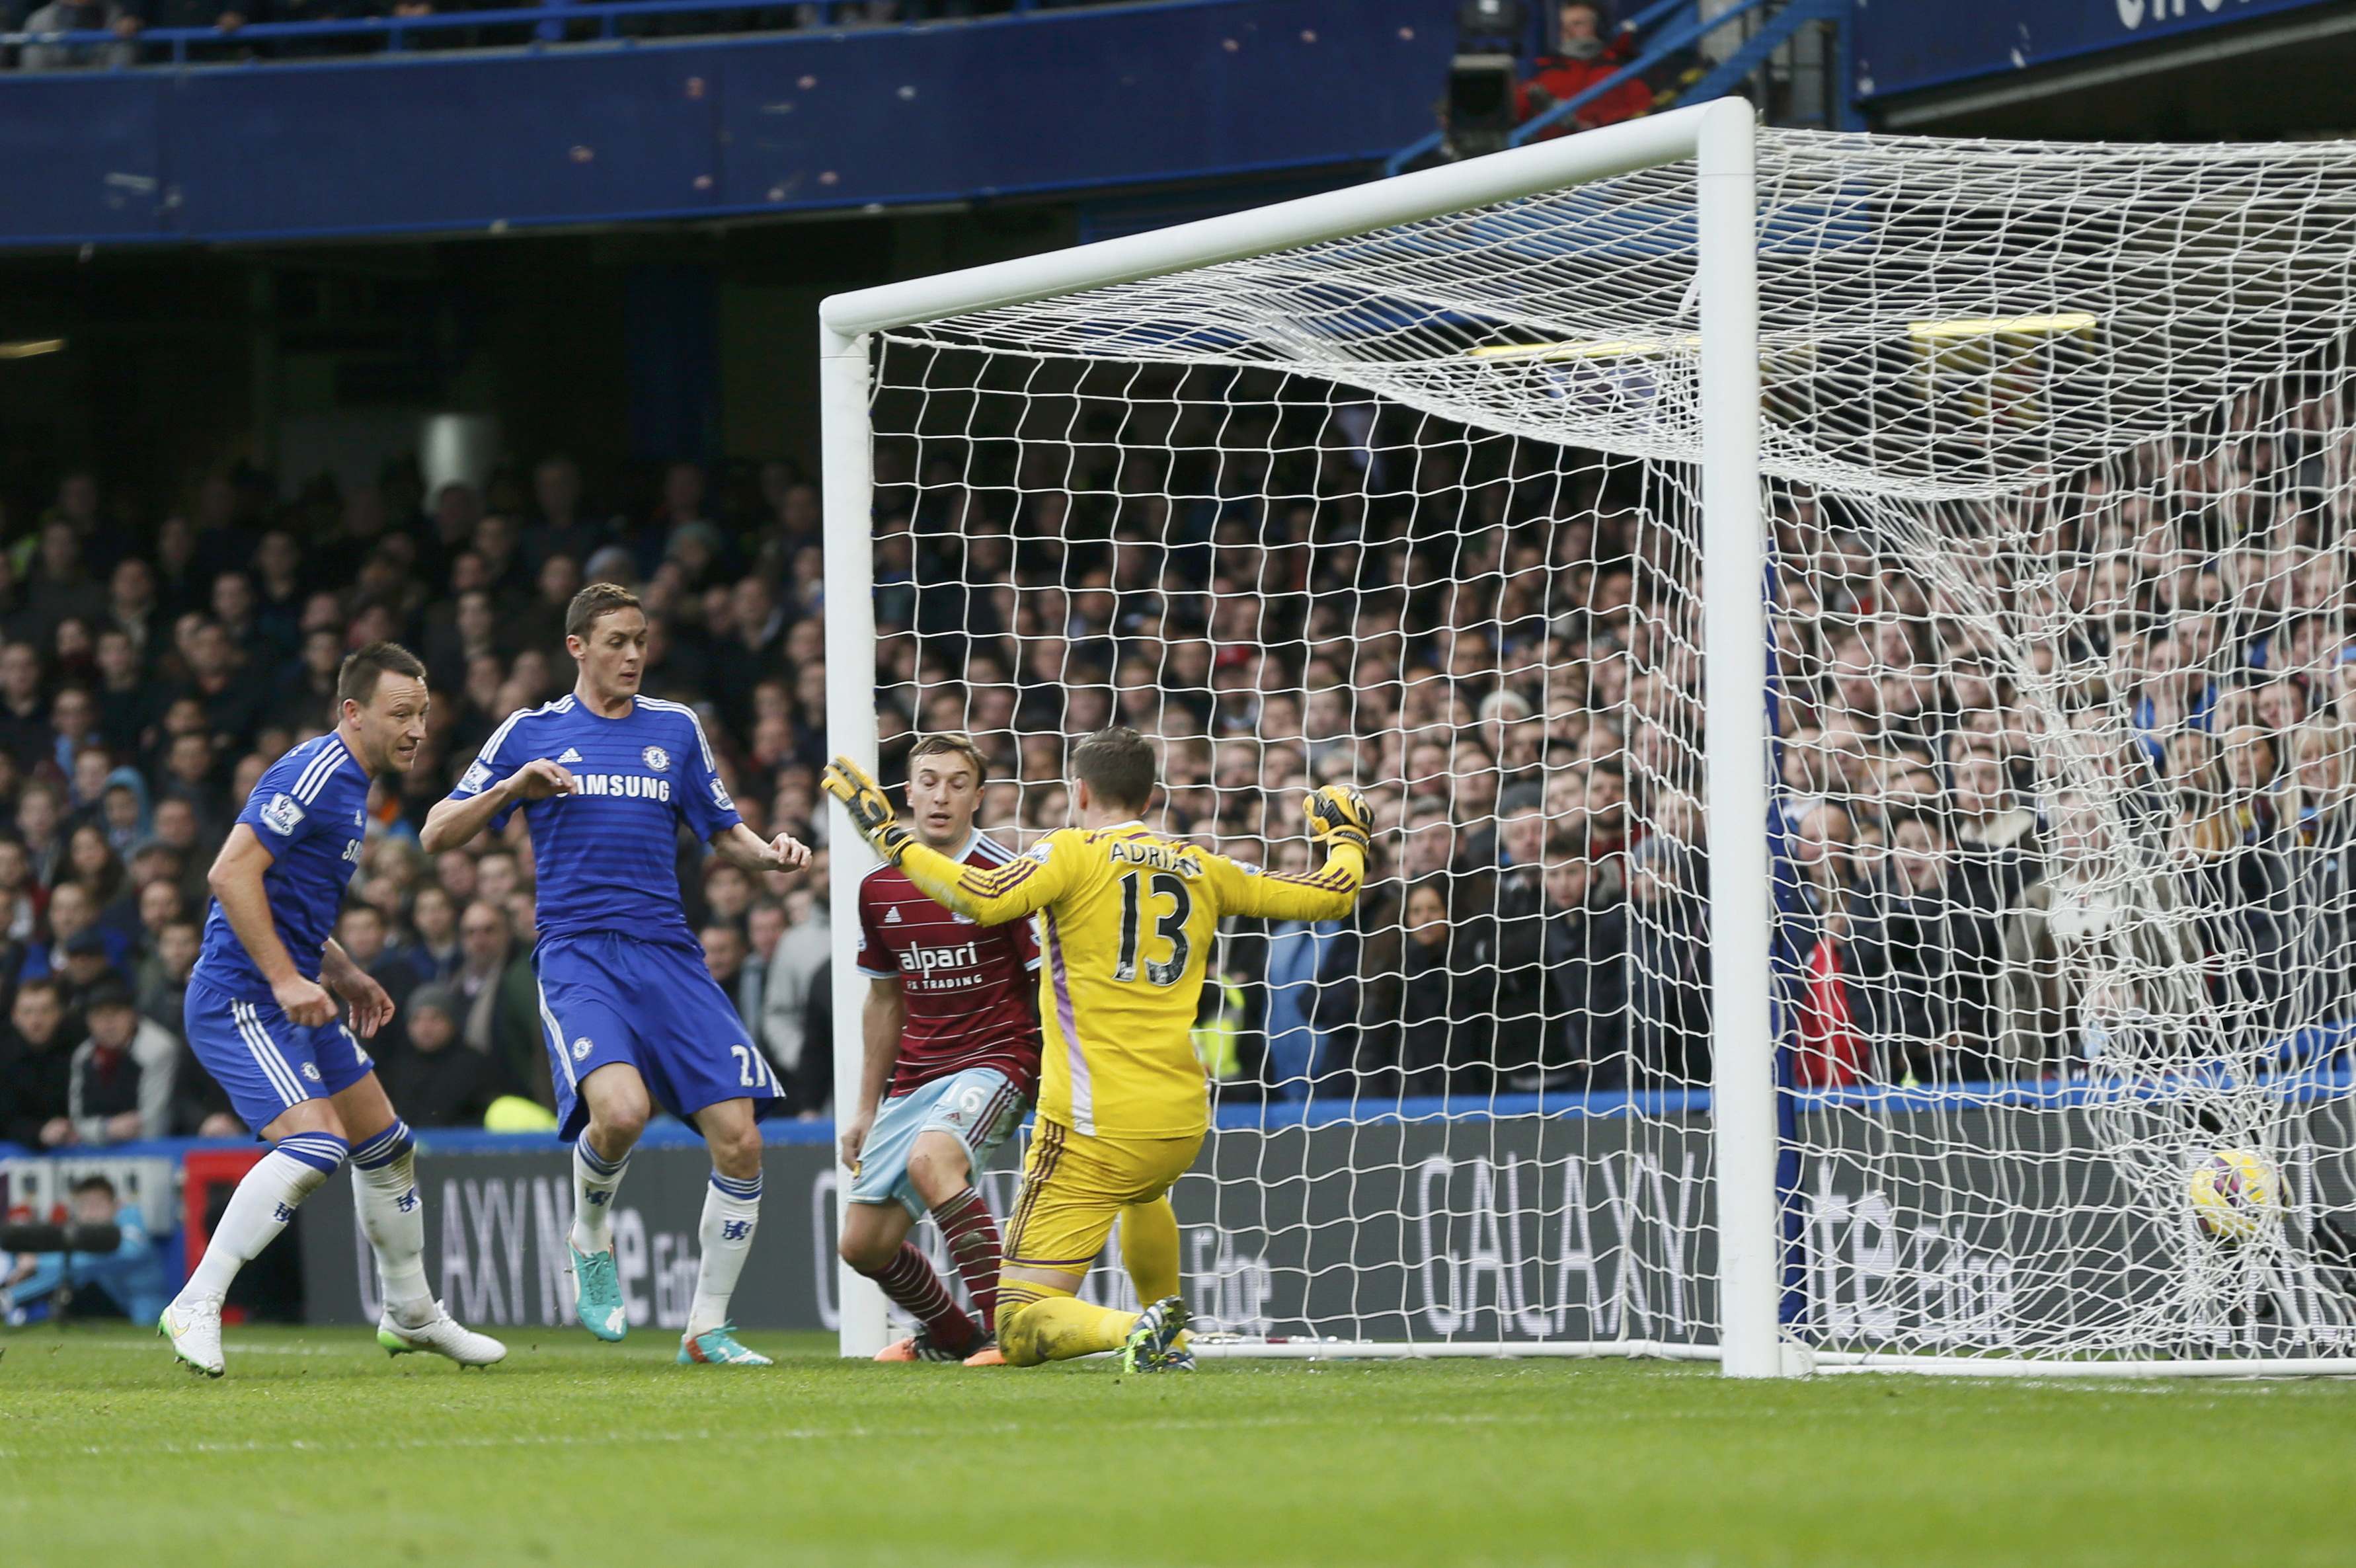 Chelsea's John Terry (L) scores a goal against West Ham United during their English Premier League soccer match at Stamford Bridge in London, December 26, 2014. REUTERS/Stefan Wermuth (BRITAIN - Tags: SOCCER SPORT) FOR EDITORIAL USE ONLY. NOT FOR SALE FOR MARKETING OR ADVERTISING CAMPAIGNS. EDITORIAL USE ONLY. NO USE WITH UNAUTHORIZED AUDIO, VIDEO, DATA, FIXTURE LISTS, CLUB/LEAGUE LOGOS OR 'LIVE' SERVICES. ONLINE IN-MATCH USE LIMITED TO 45 IMAGES, NO VIDEO EMULATION. NO USE IN BETTING, GAMES OR SINGLE CLUB/LEAGUE/PLAYER PUBLICATIONS.